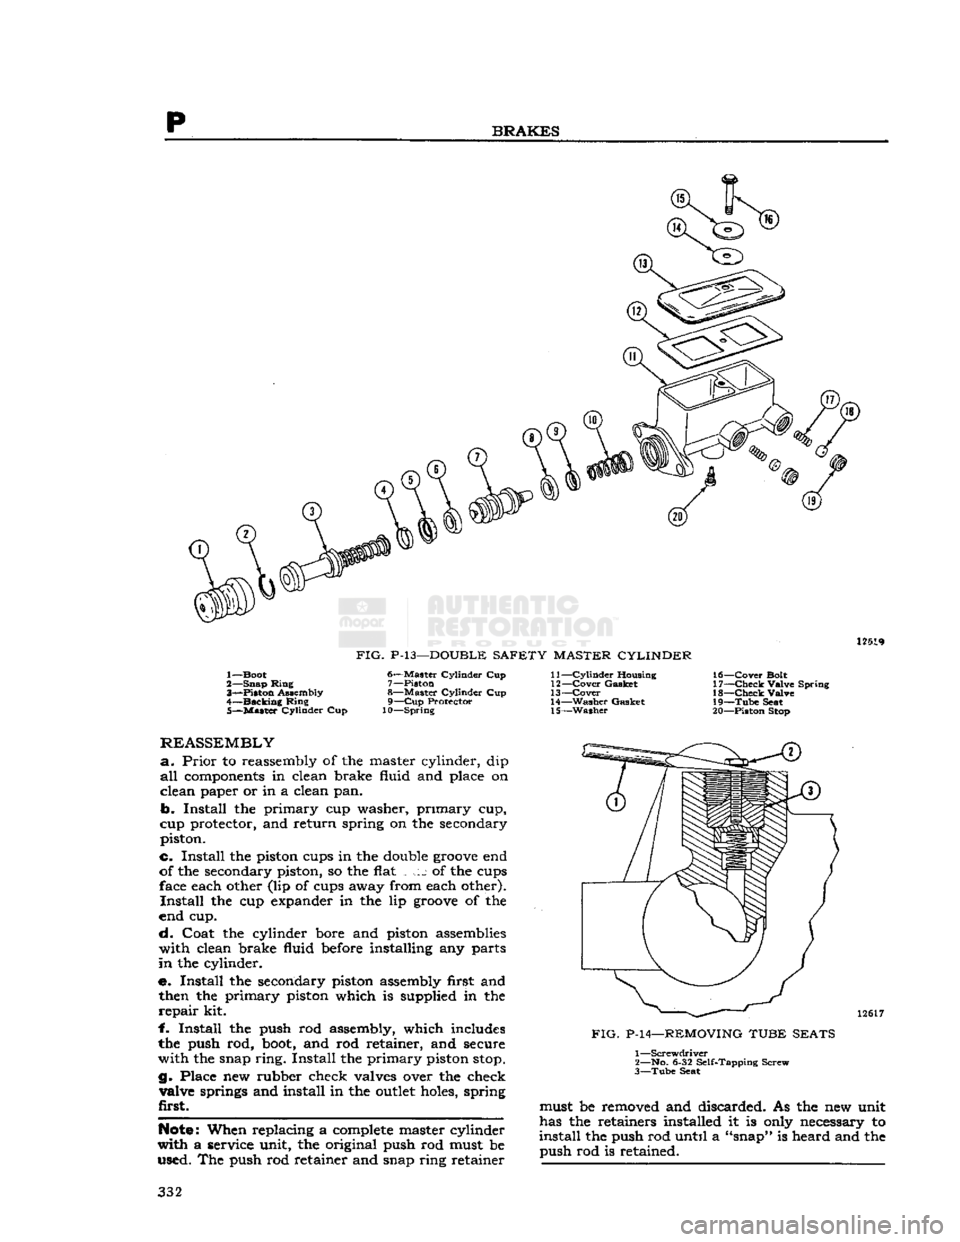 JEEP CJ 1953  Service Manual 
BRAKES 

12519 

FIG.
 P-13—DOUBLE
 SAFETY MASTER CYLINDER 
1— Boot 
2— Snap Ming  3"*—Piston Assembly 
4—
 Backing
 Ring 5—
 Master
 Cylinder Cup  6—
 Master
 Cylinder Cup 
7— Piston